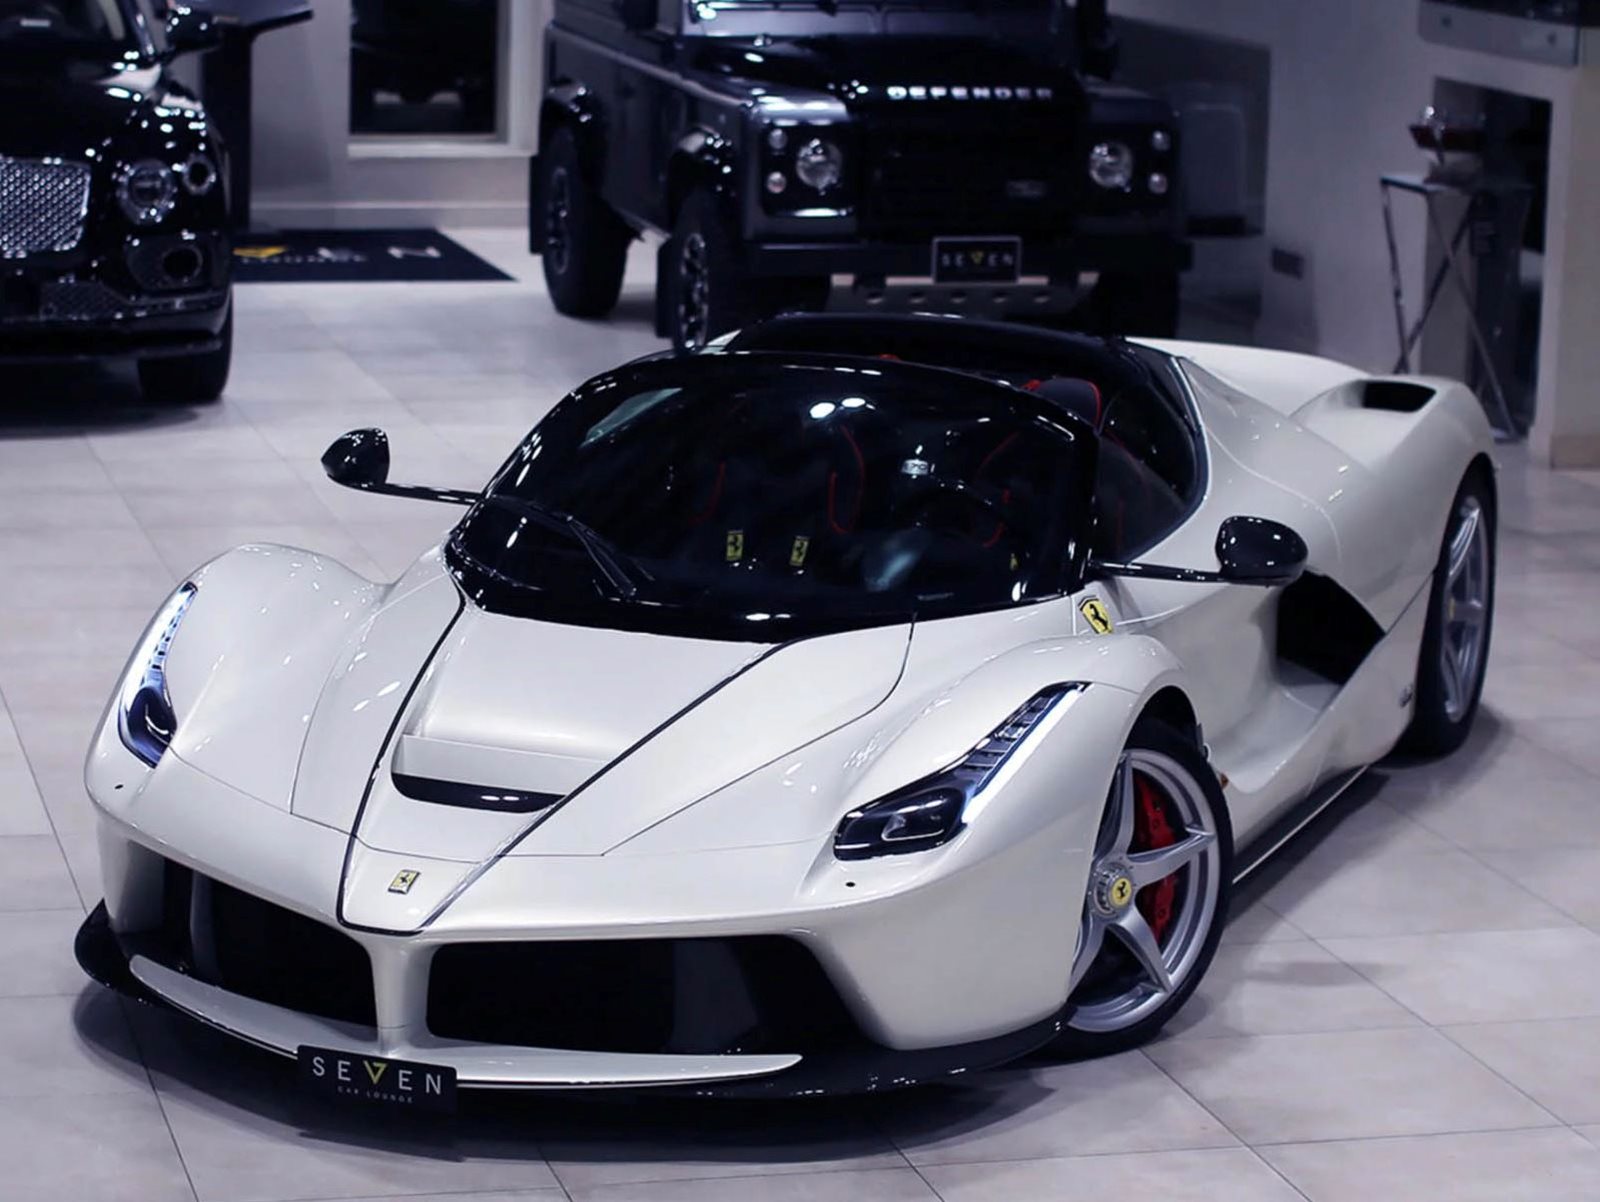 This Stunning White LaFerrari Aperta Has Only Driven 60 Miles